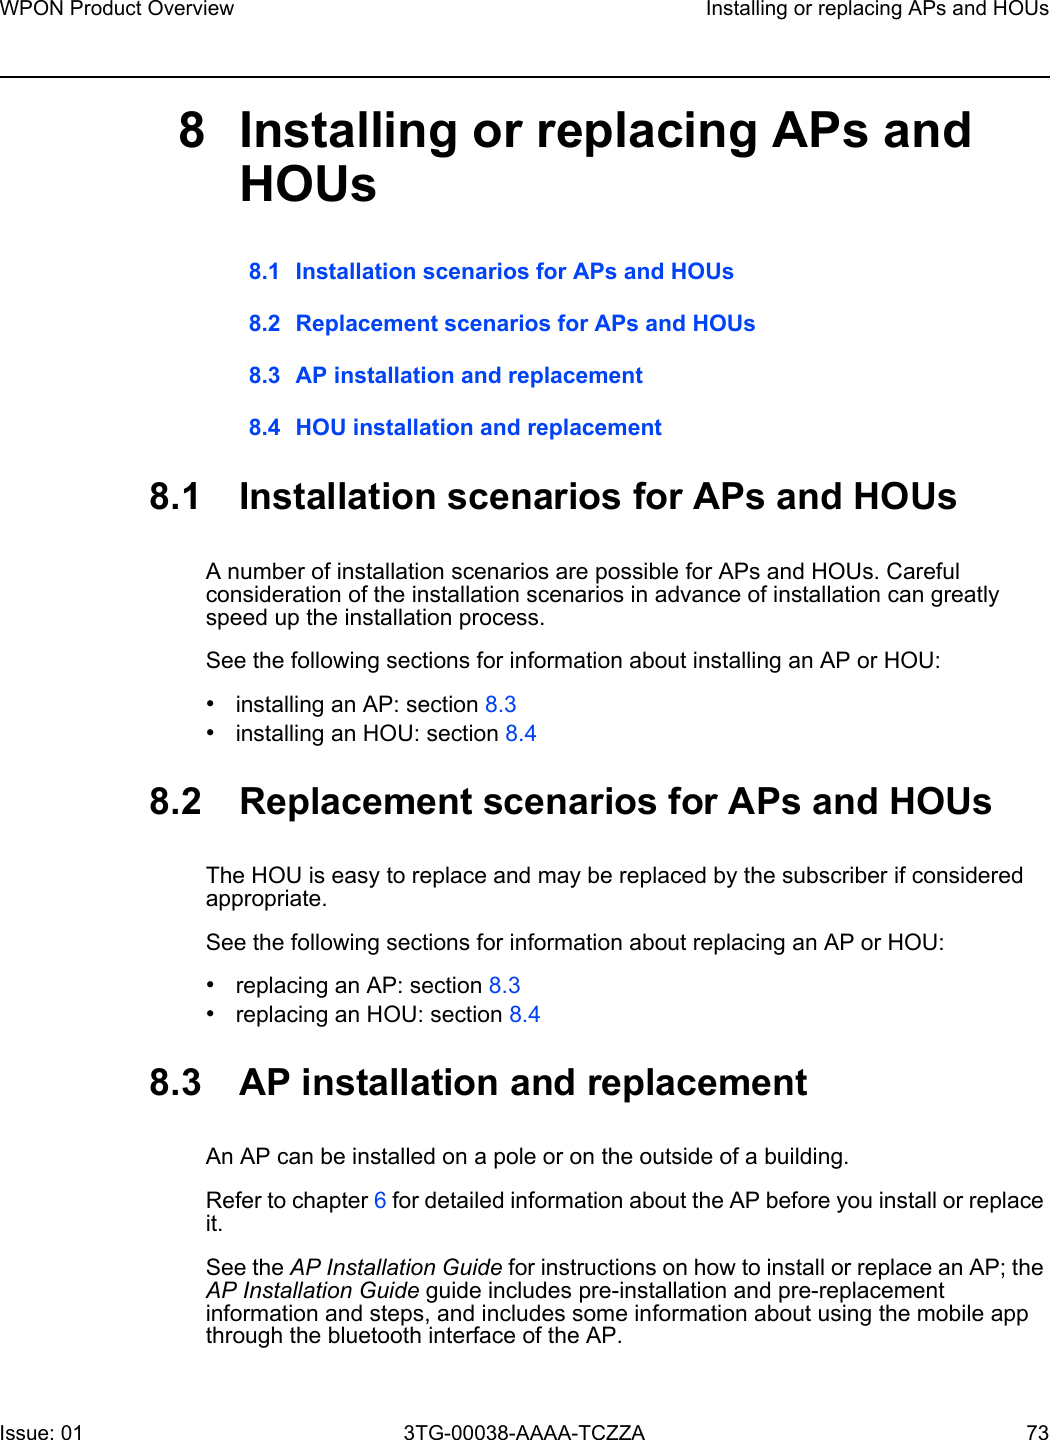 WPON Product Overview Installing or replacing APs and HOUsIssue: 01 3TG-00038-AAAA-TCZZA 73 8 Installing or replacing APs and HOUs8.1 Installation scenarios for APs and HOUs8.2 Replacement scenarios for APs and HOUs8.3 AP installation and replacement8.4 HOU installation and replacement8.1 Installation scenarios for APs and HOUsA number of installation scenarios are possible for APs and HOUs. Careful consideration of the installation scenarios in advance of installation can greatly speed up the installation process. See the following sections for information about installing an AP or HOU:•installing an AP: section 8.3•installing an HOU: section 8.48.2 Replacement scenarios for APs and HOUsThe HOU is easy to replace and may be replaced by the subscriber if considered appropriate. See the following sections for information about replacing an AP or HOU:•replacing an AP: section 8.3•replacing an HOU: section 8.48.3 AP installation and replacementAn AP can be installed on a pole or on the outside of a building. Refer to chapter 6 for detailed information about the AP before you install or replace it.See the AP Installation Guide for instructions on how to install or replace an AP; the AP Installation Guide guide includes pre-installation and pre-replacement information and steps, and includes some information about using the mobile app through the bluetooth interface of the AP.